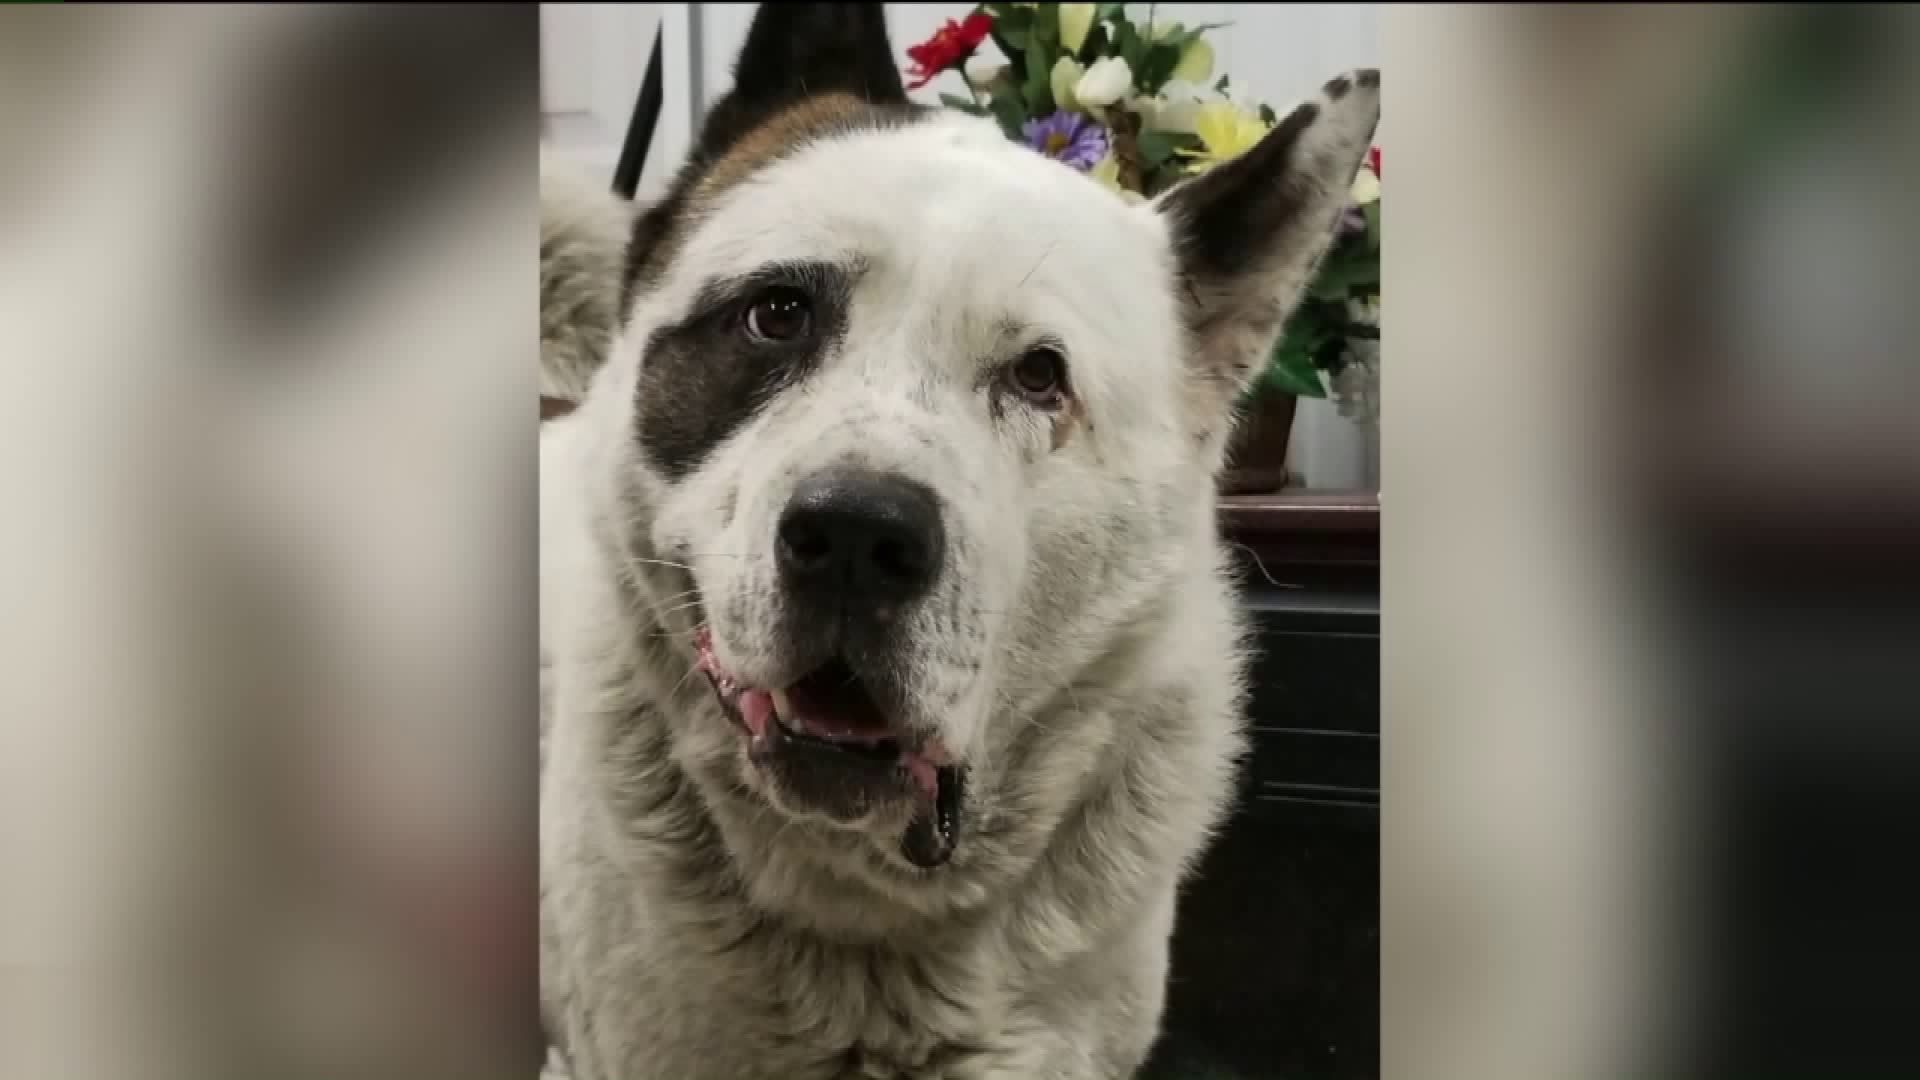 Suffering Dog Found Shot, Unable to be Saved